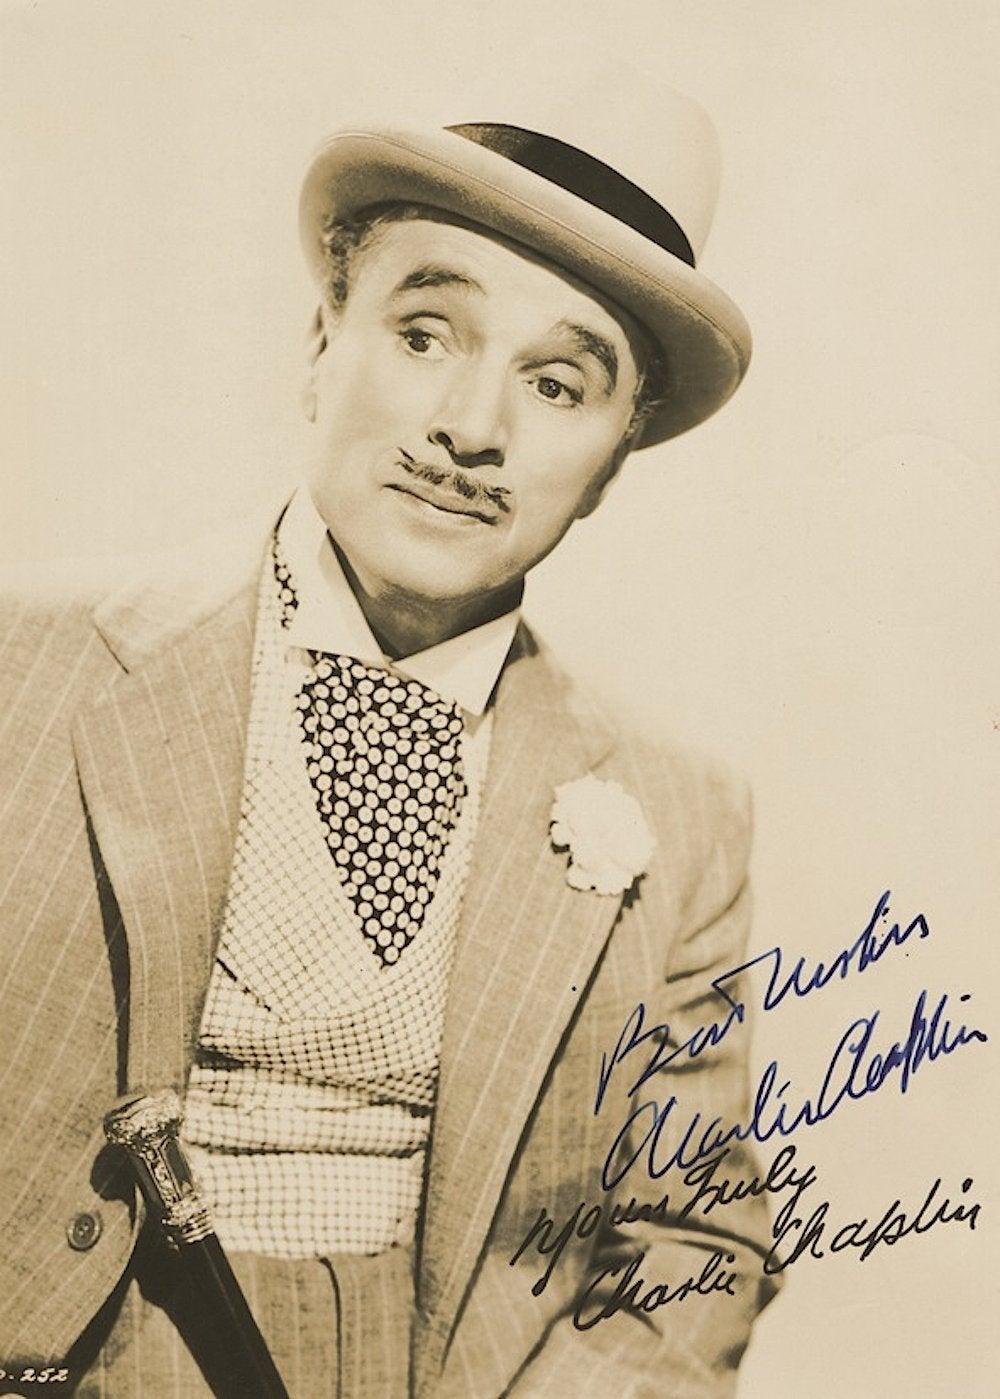 A signed photograph of Charlie Chaplin as his character from the controversial 1947 film Monsieur Verdoux

Charlie Chaplin was the biggest star of the silent era. Born into poverty in Victorian London, he found his way to the stage and on to